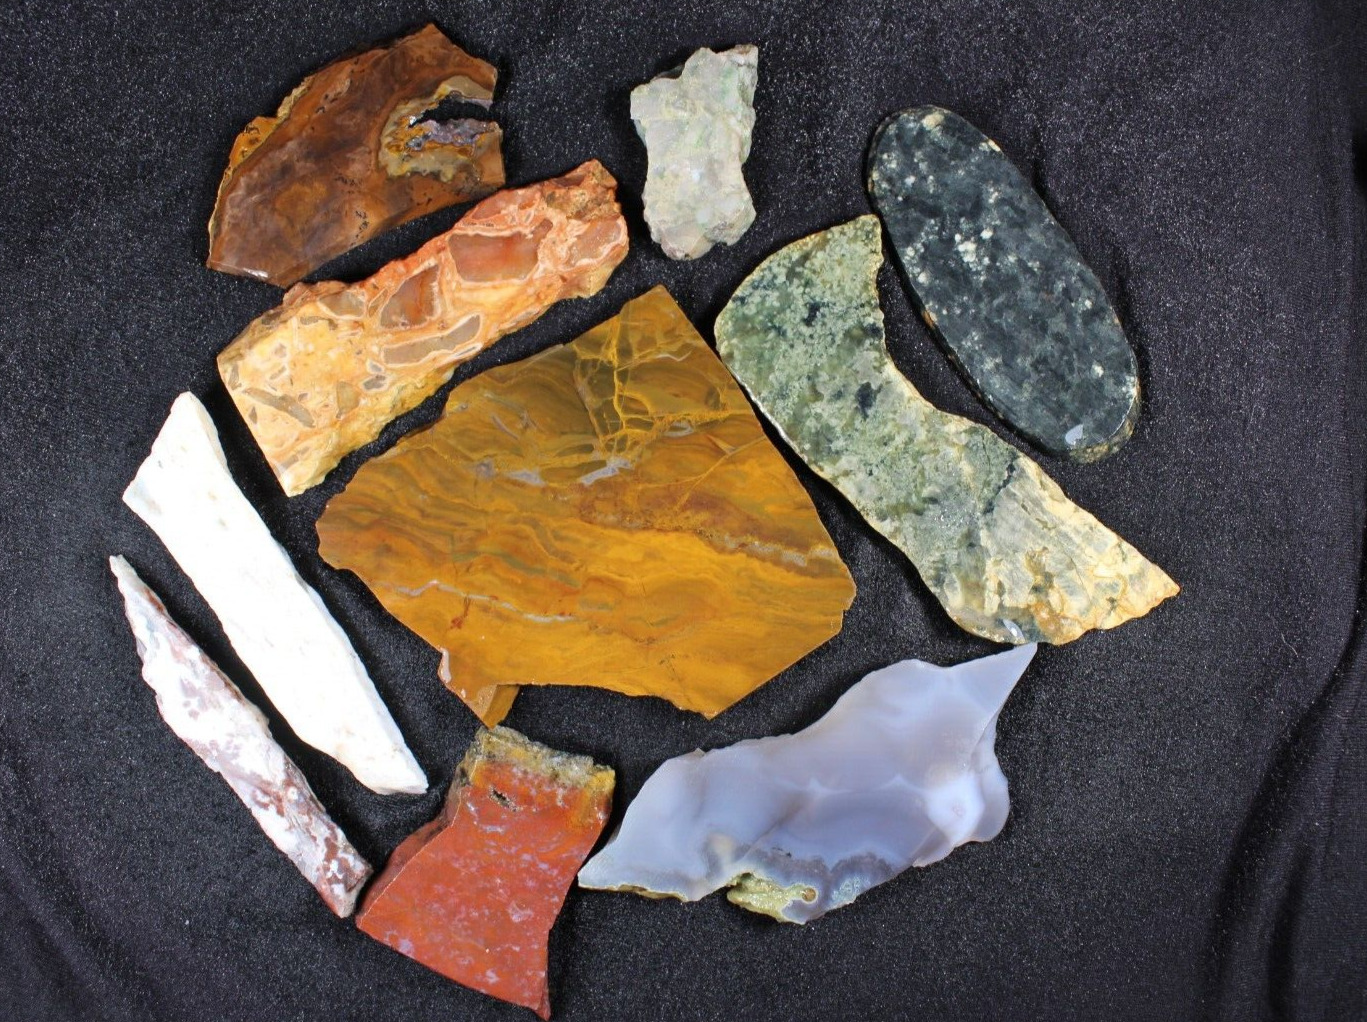 PJ: Mixed Lot of Slabs - Jasper, Agate and More   14 Ozs